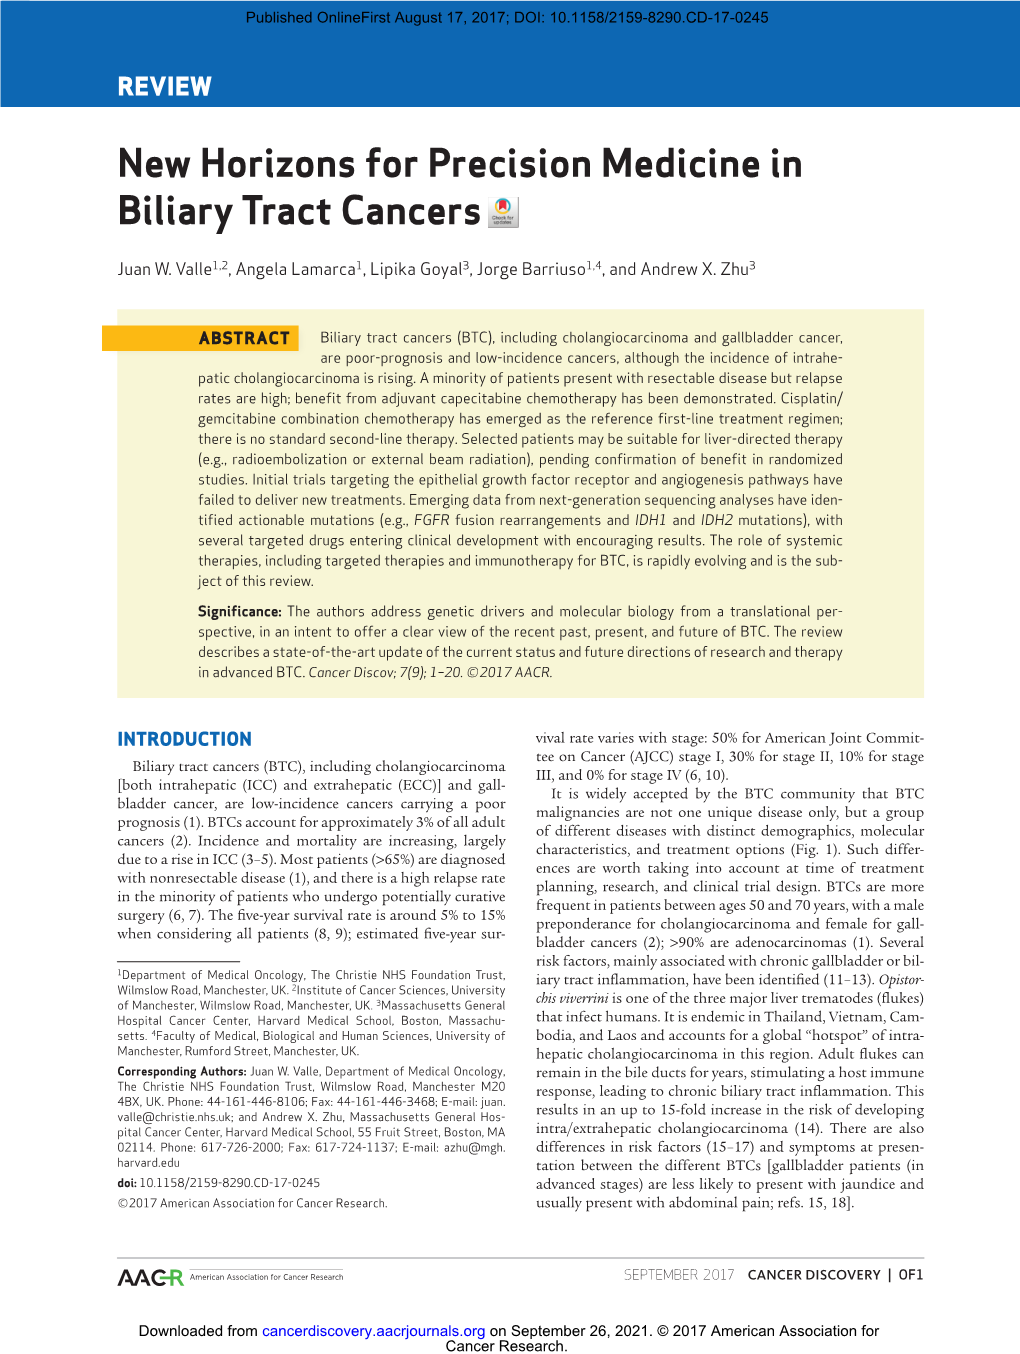 New Horizons for Precision Medicine in Biliary Tract Cancers